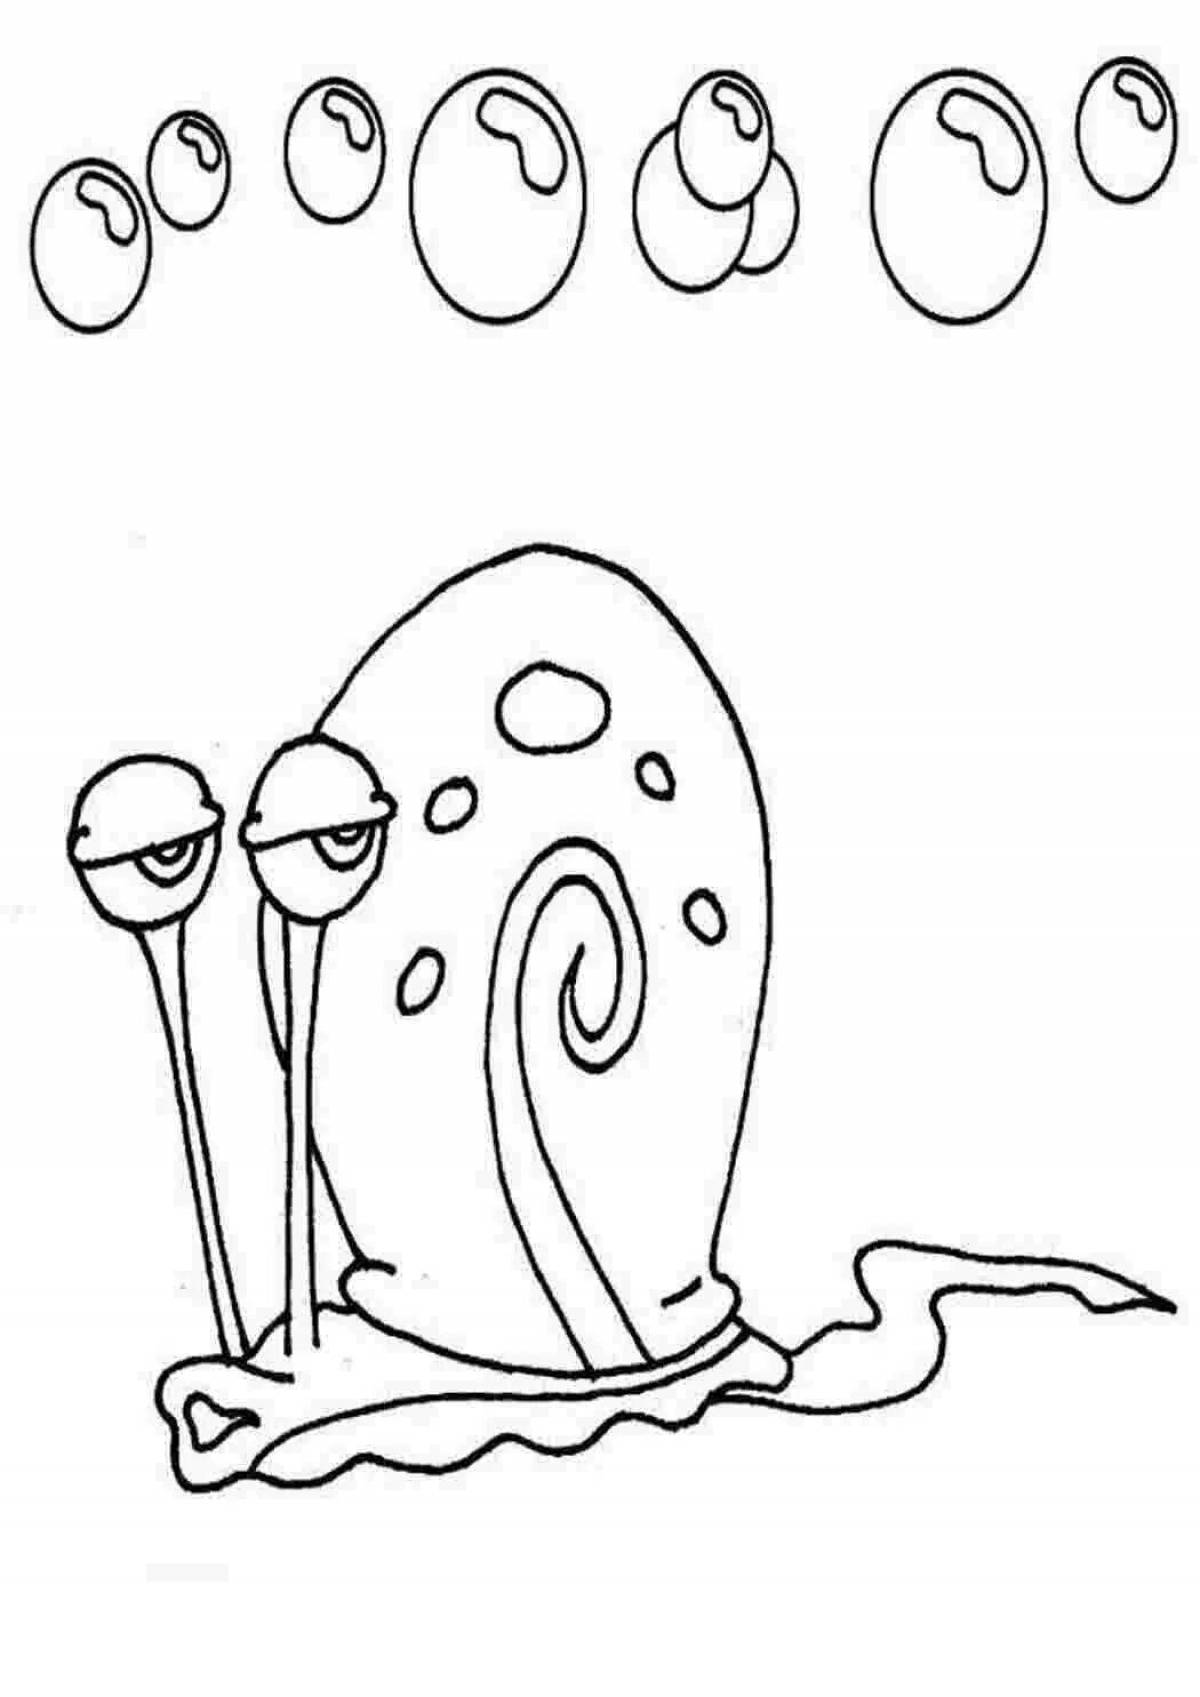 Gary's animated coloring page